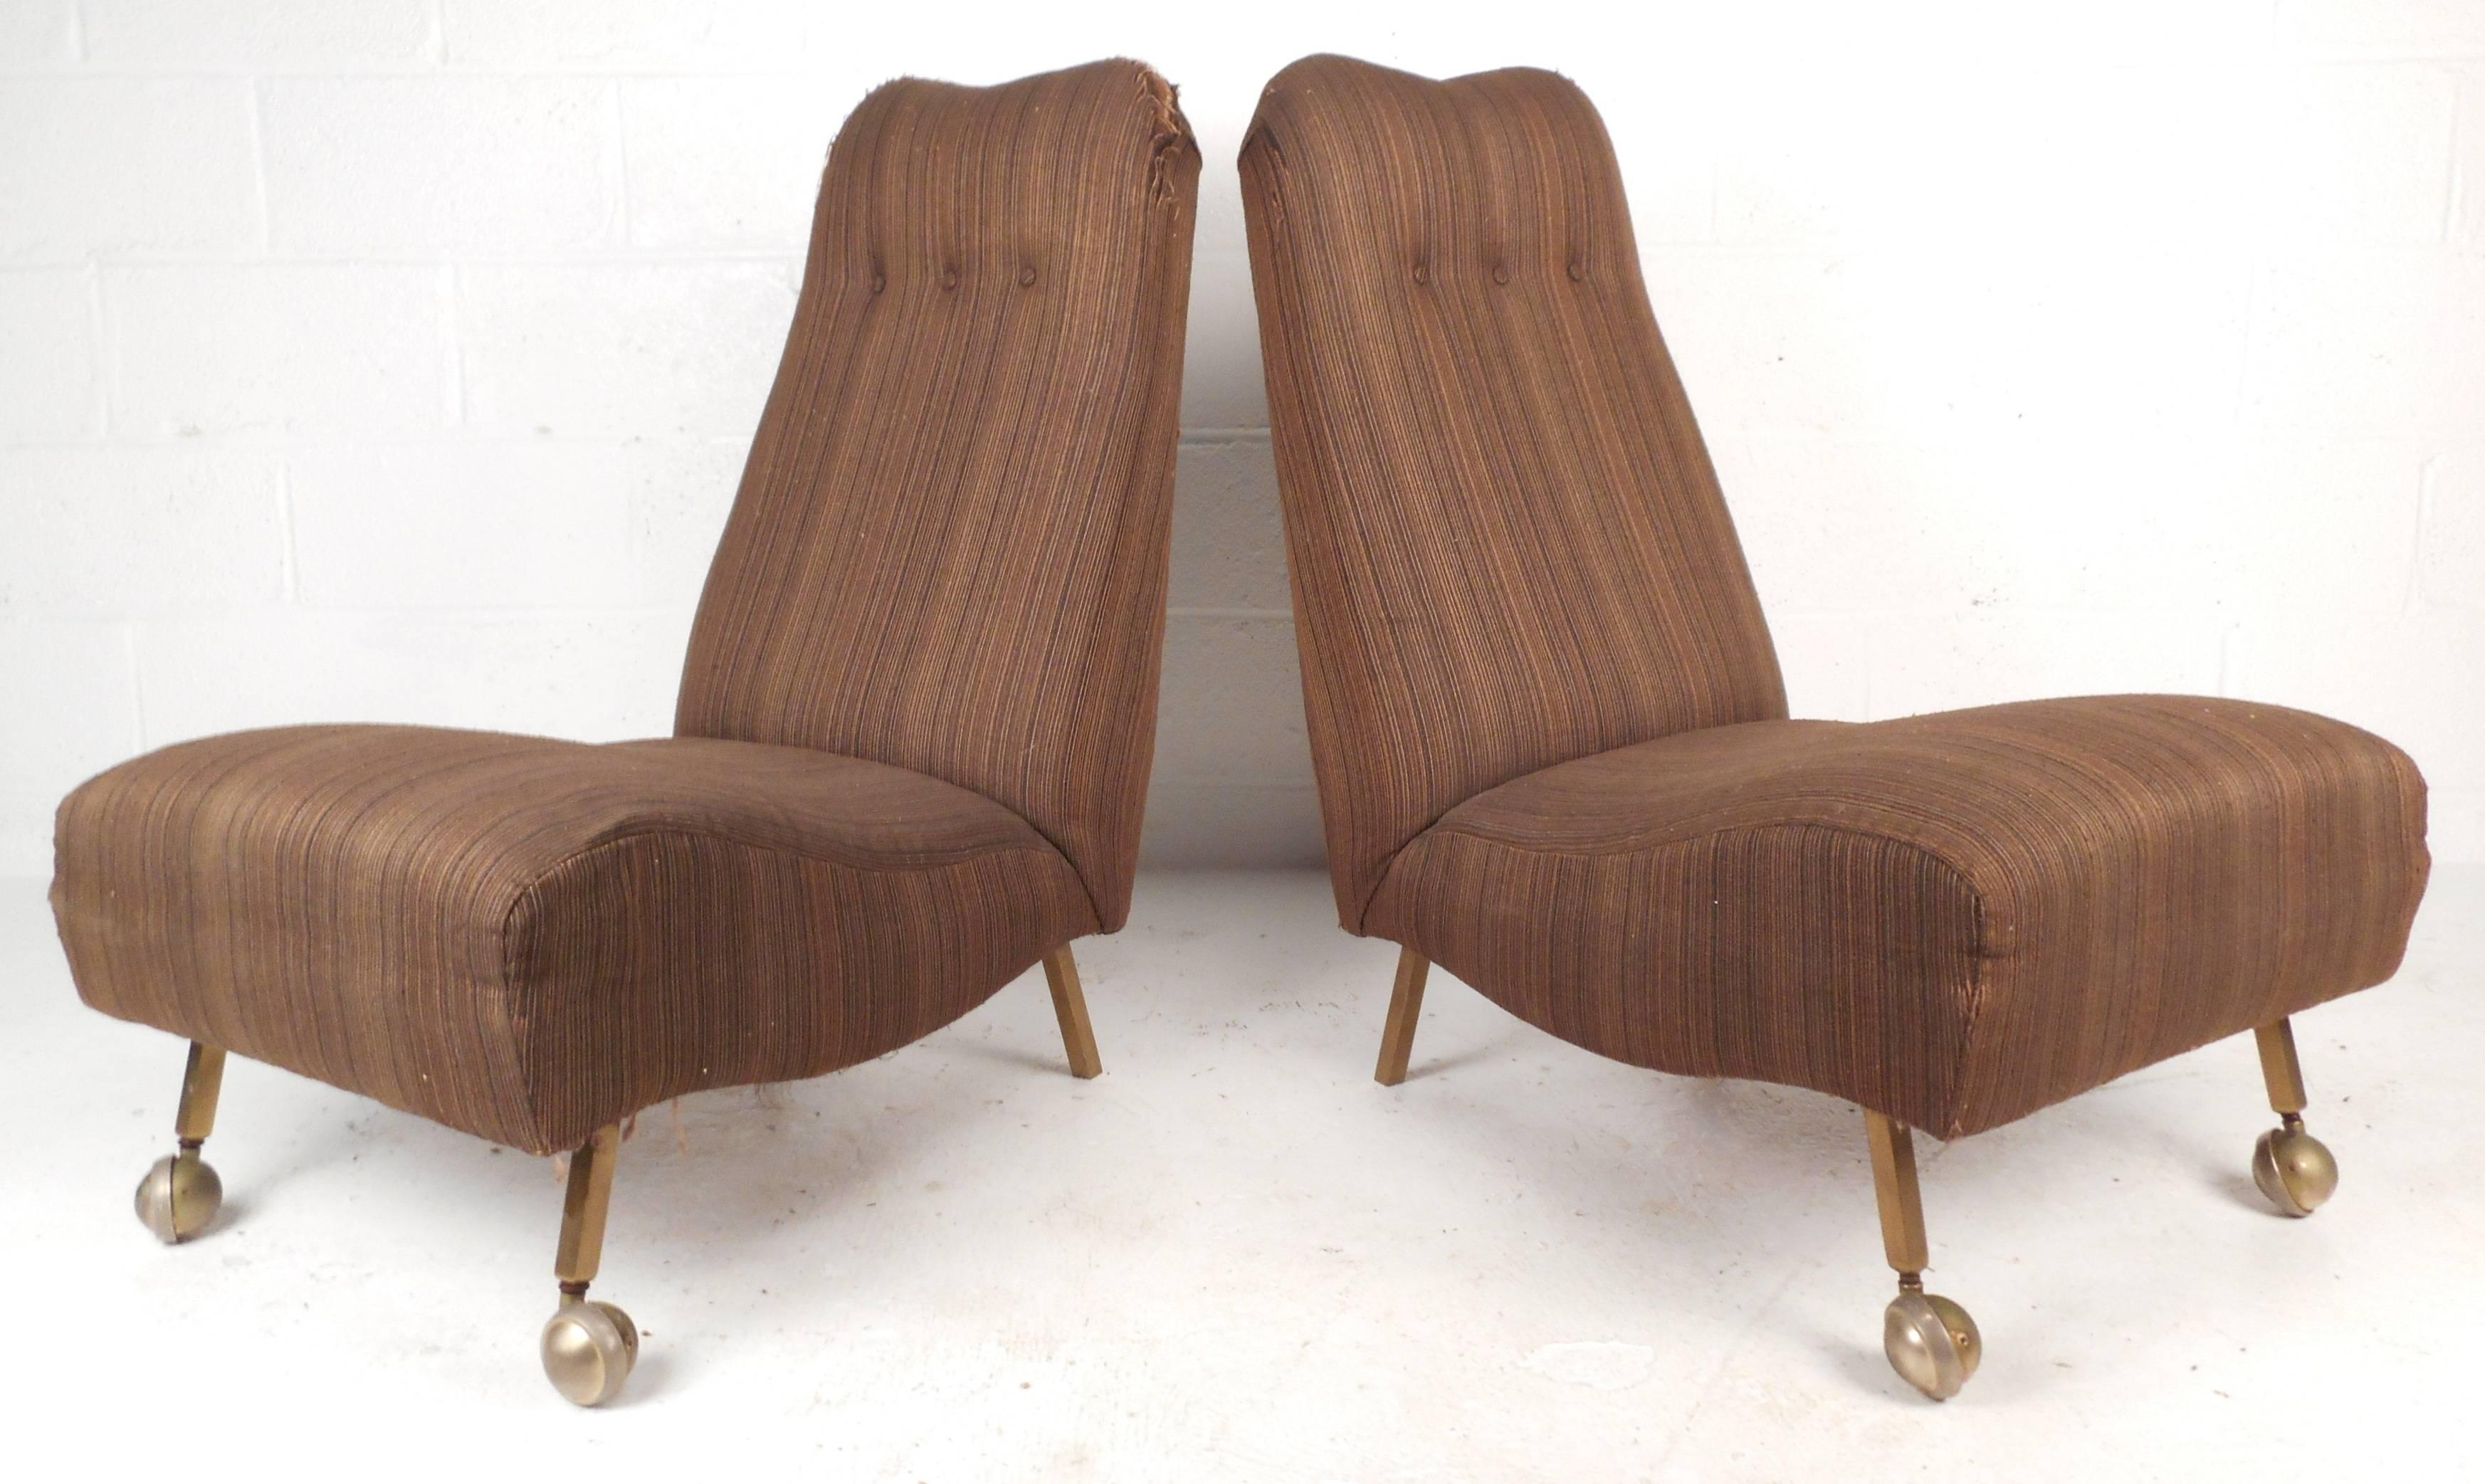 Gorgeous pair of Mid-Century Modern slipper chairs with tufted high backrests, thick comfortable seats, and brass feet offer stylish seating with an emphasis on comfort. The unique style features a sculpted brass handle on the backrest and sturdy